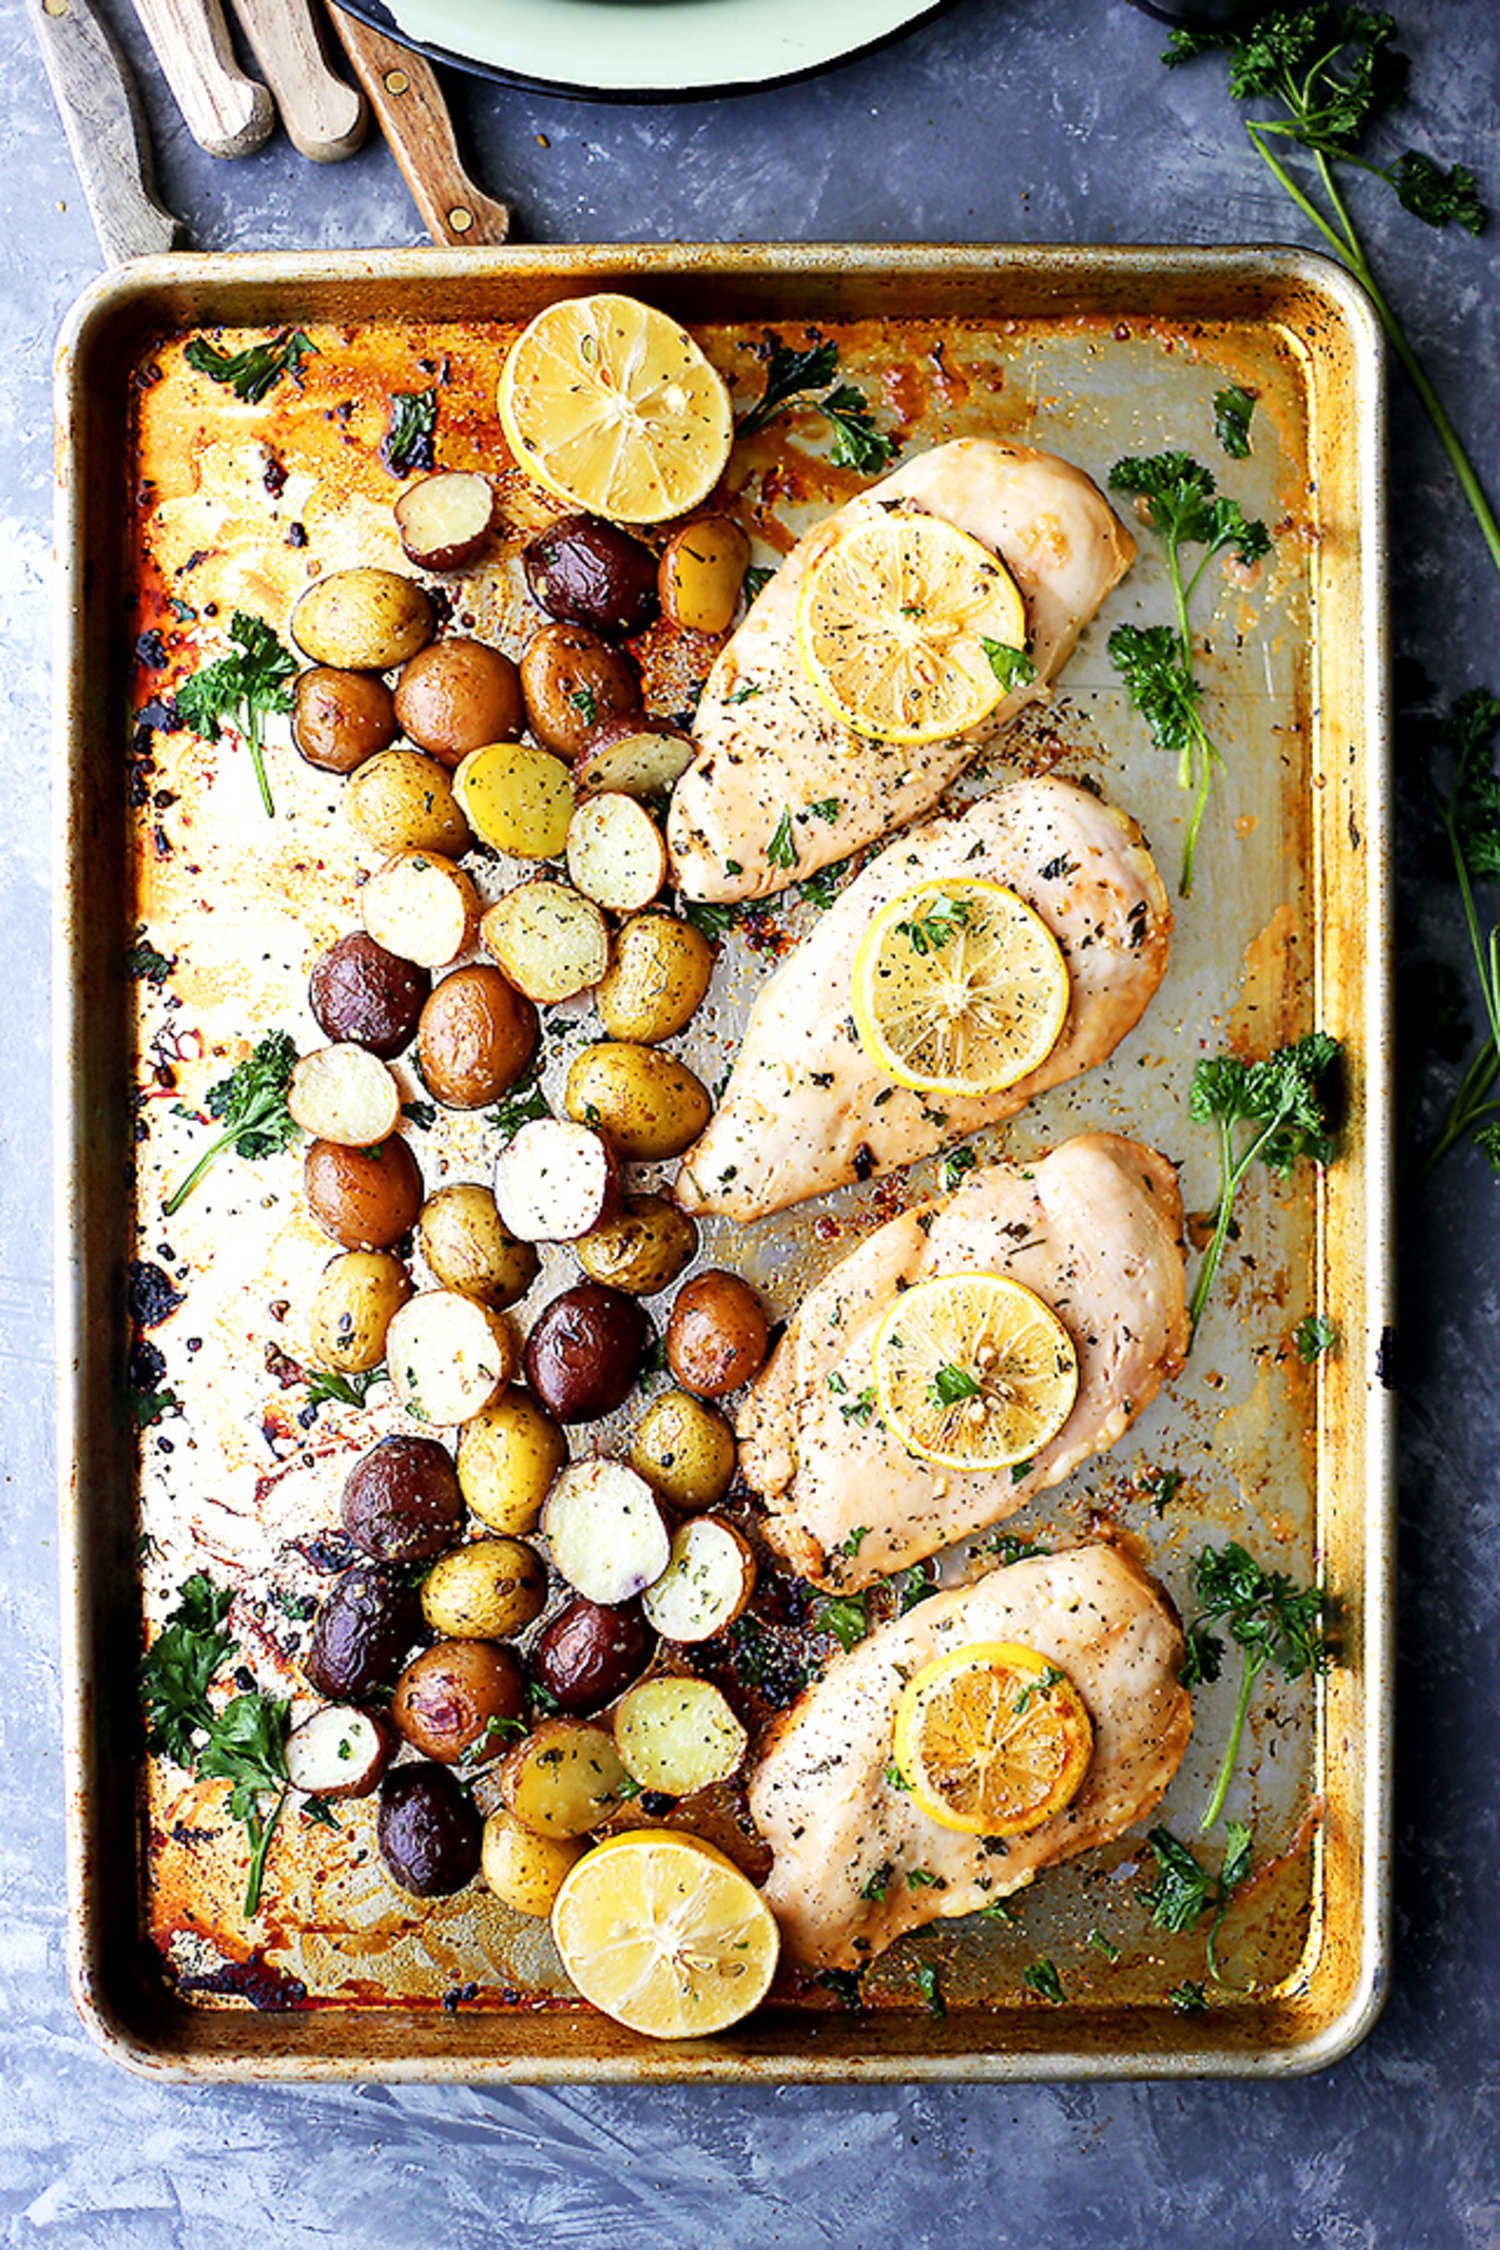 This Sheet Pan Chicken Is the Easy Dinner Your Monday Deserves | Kitchn